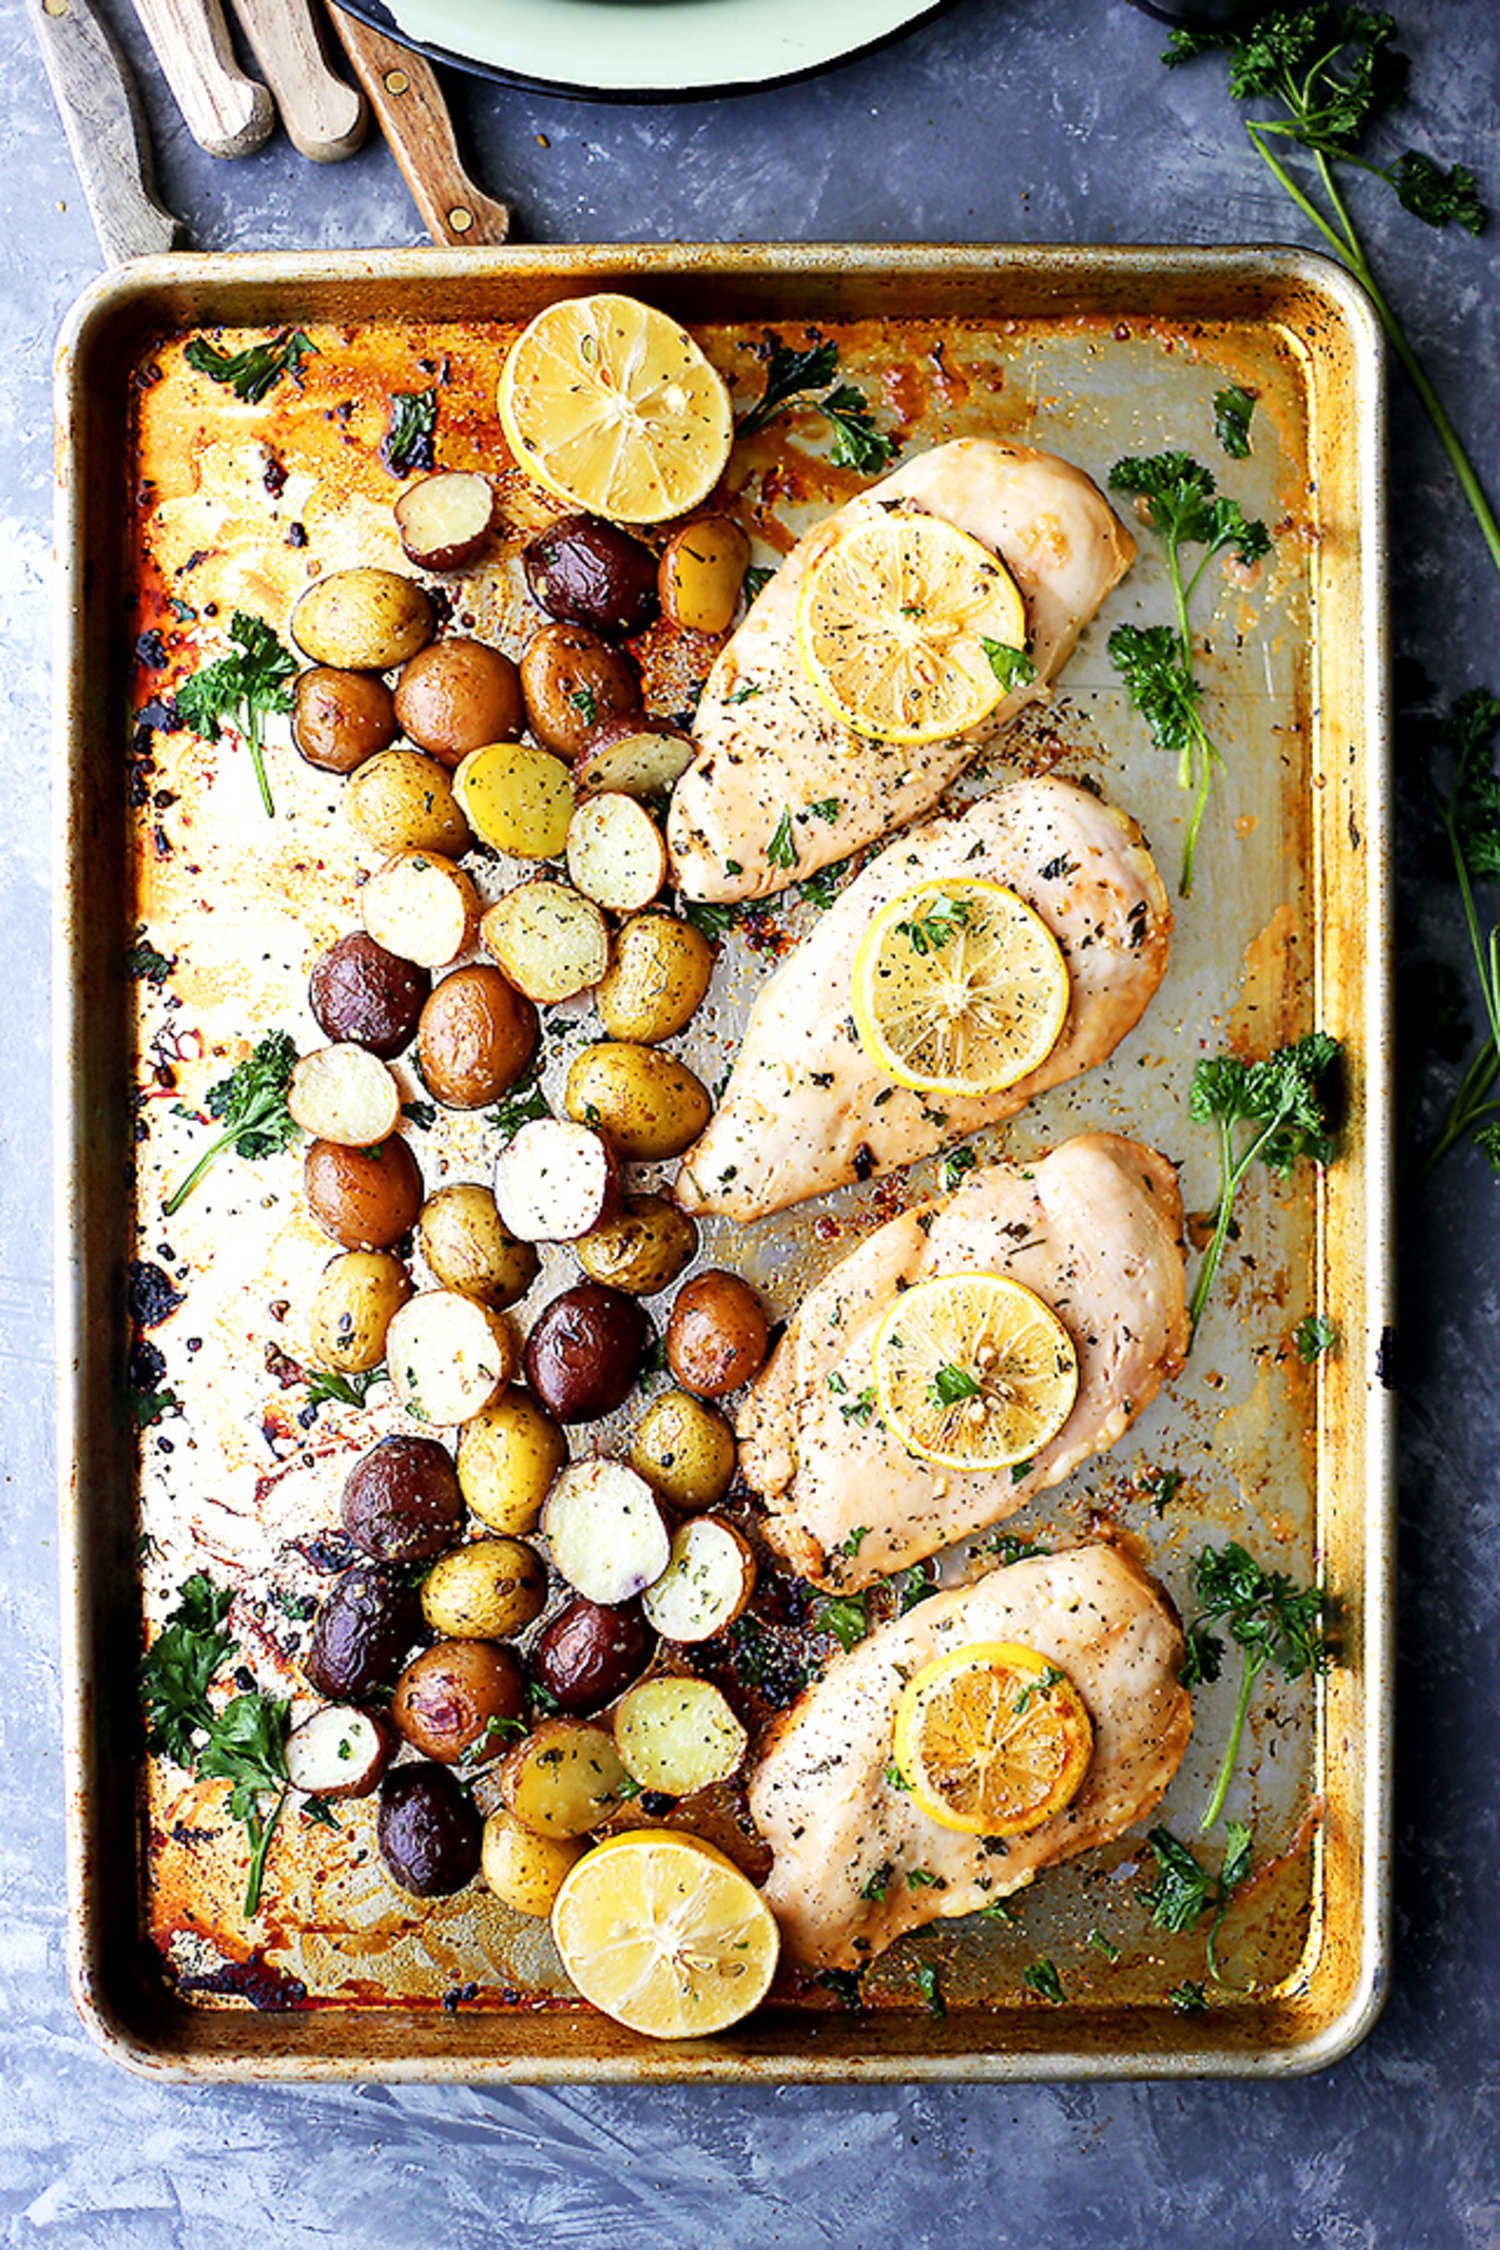 This Sheet Pan Chicken Is the Easy Dinner Your Monday Deserves | Kitchn